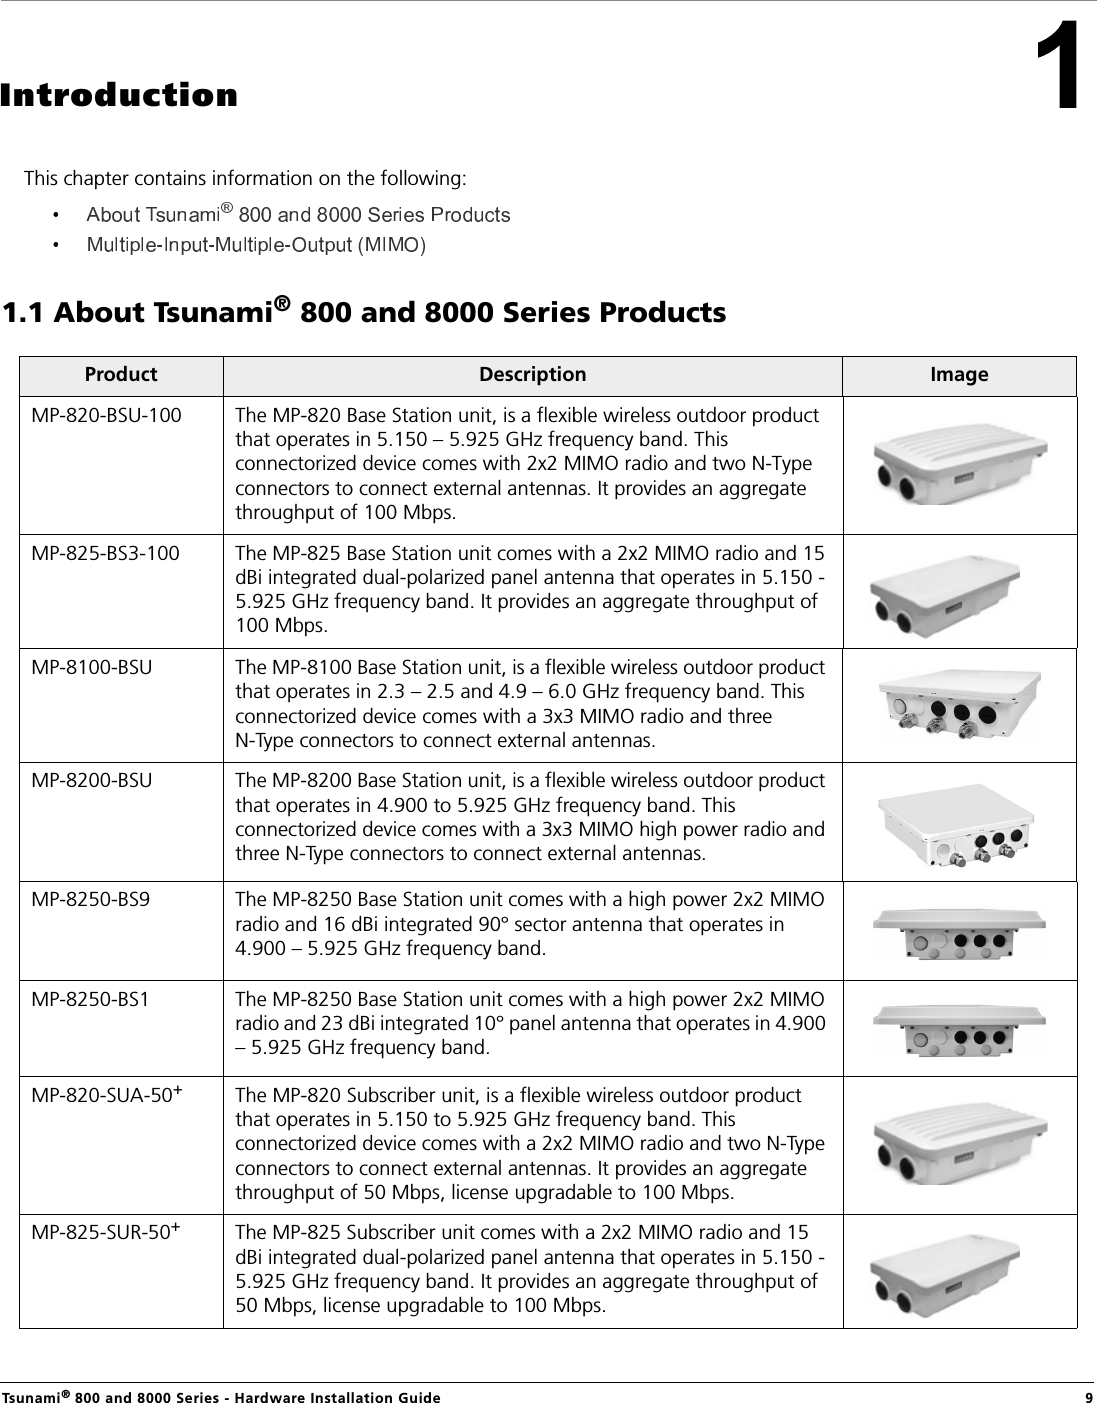 Tsunami® 800 and 8000 Series - Hardware Installation Guide  9IntroductionThis chapter contains information on the following:1.1 About Tsunami® 800 and 8000 Series ProductsProduct Description ImageMP-820-BSU-100 The MP-820 Base Station unit, is a flexible wireless outdoor product that operates in 5.150 – 5.925 GHz frequency band. This connectorized device comes with 2x2 MIMO radio and two N-Type connectors to connect external antennas. It provides an aggregate throughput of 100 Mbps.MP-825-BS3-100 The MP-825 Base Station unit comes with a 2x2 MIMO radio and 15 dBi integrated dual-polarized panel antenna that operates in 5.150 - 5.925 GHz frequency band. It provides an aggregate throughput of 100 Mbps.MP-8100-BSU  The MP-8100 Base Station unit, is a flexible wireless outdoor product that operates in 2.3 – 2.5 and 4.9 – 6.0 GHz frequency band. This connectorized device comes with a 3x3 MIMO radio and three N-Type connectors to connect external antennas.MP-8200-BSU The MP-8200 Base Station unit, is a flexible wireless outdoor product that operates in 4.900 to 5.925 GHz frequency band. This connectorized device comes with a 3x3 MIMO high power radio and three N-Type connectors to connect external antennas.MP-8250-BS9 The MP-8250 Base Station unit comes with a high power 2x2 MIMO radio and 16 dBi integrated 90° sector antenna that operates in 4.900 – 5.925 GHz frequency band.MP-8250-BS1 The MP-8250 Base Station unit comes with a high power 2x2 MIMO radio and 23 dBi integrated 10° panel antenna that operates in 4.900 – 5.925 GHz frequency band.MP-820-SUA-50+The MP-820 Subscriber unit, is a flexible wireless outdoor product that operates in 5.150 to 5.925 GHz frequency band. This connectorized device comes with a 2x2 MIMO radio and two N-Type connectors to connect external antennas. It provides an aggregate throughput of 50 Mbps, license upgradable to 100 Mbps.MP-825-SUR-50+The MP-825 Subscriber unit comes with a 2x2 MIMO radio and 15 dBi integrated dual-polarized panel antenna that operates in 5.150 - 5.925 GHz frequency band. It provides an aggregate throughput of 50 Mbps, license upgradable to 100 Mbps.